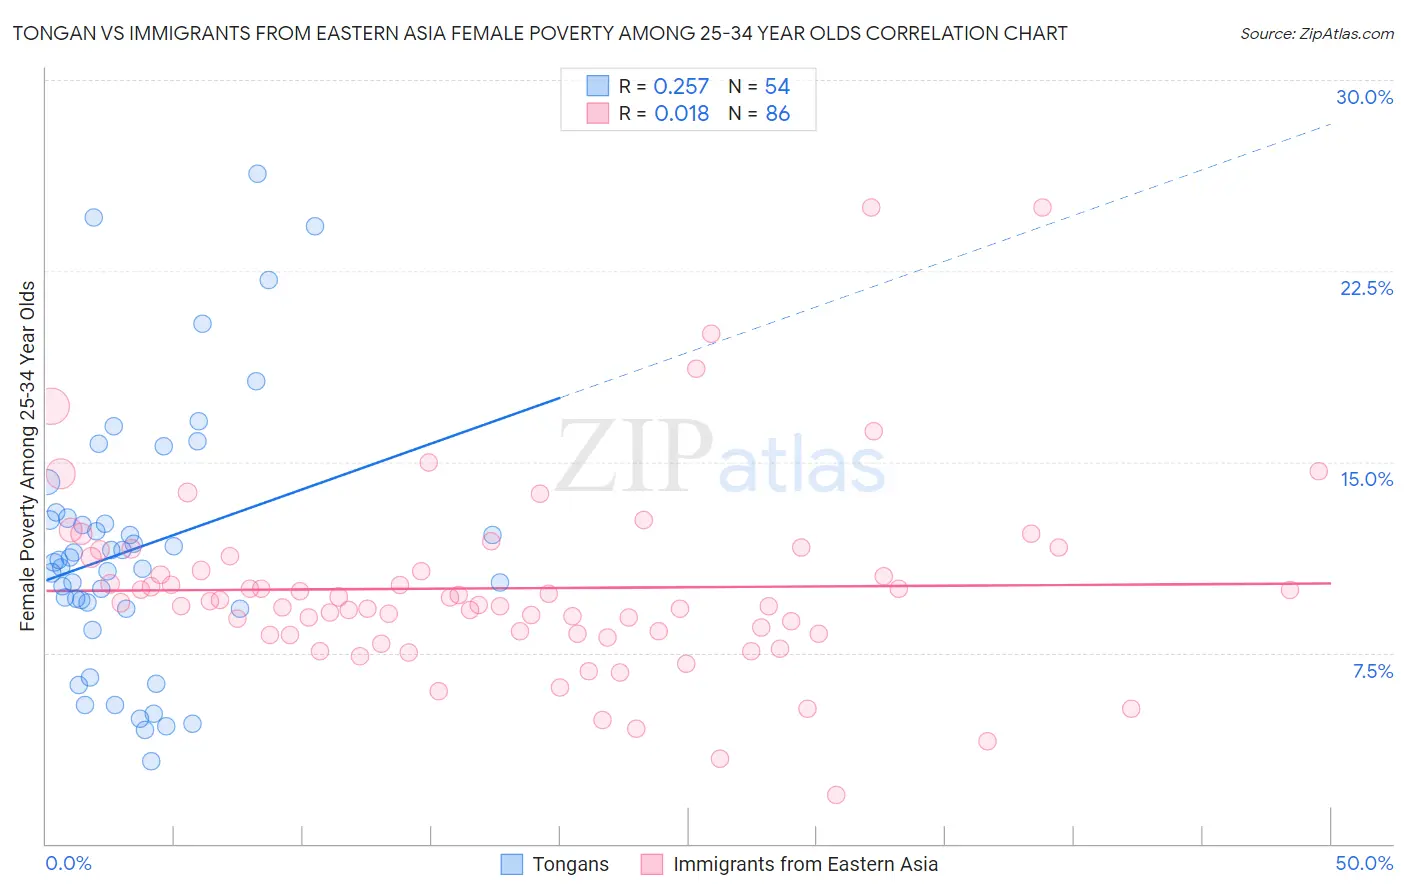 Tongan vs Immigrants from Eastern Asia Female Poverty Among 25-34 Year Olds